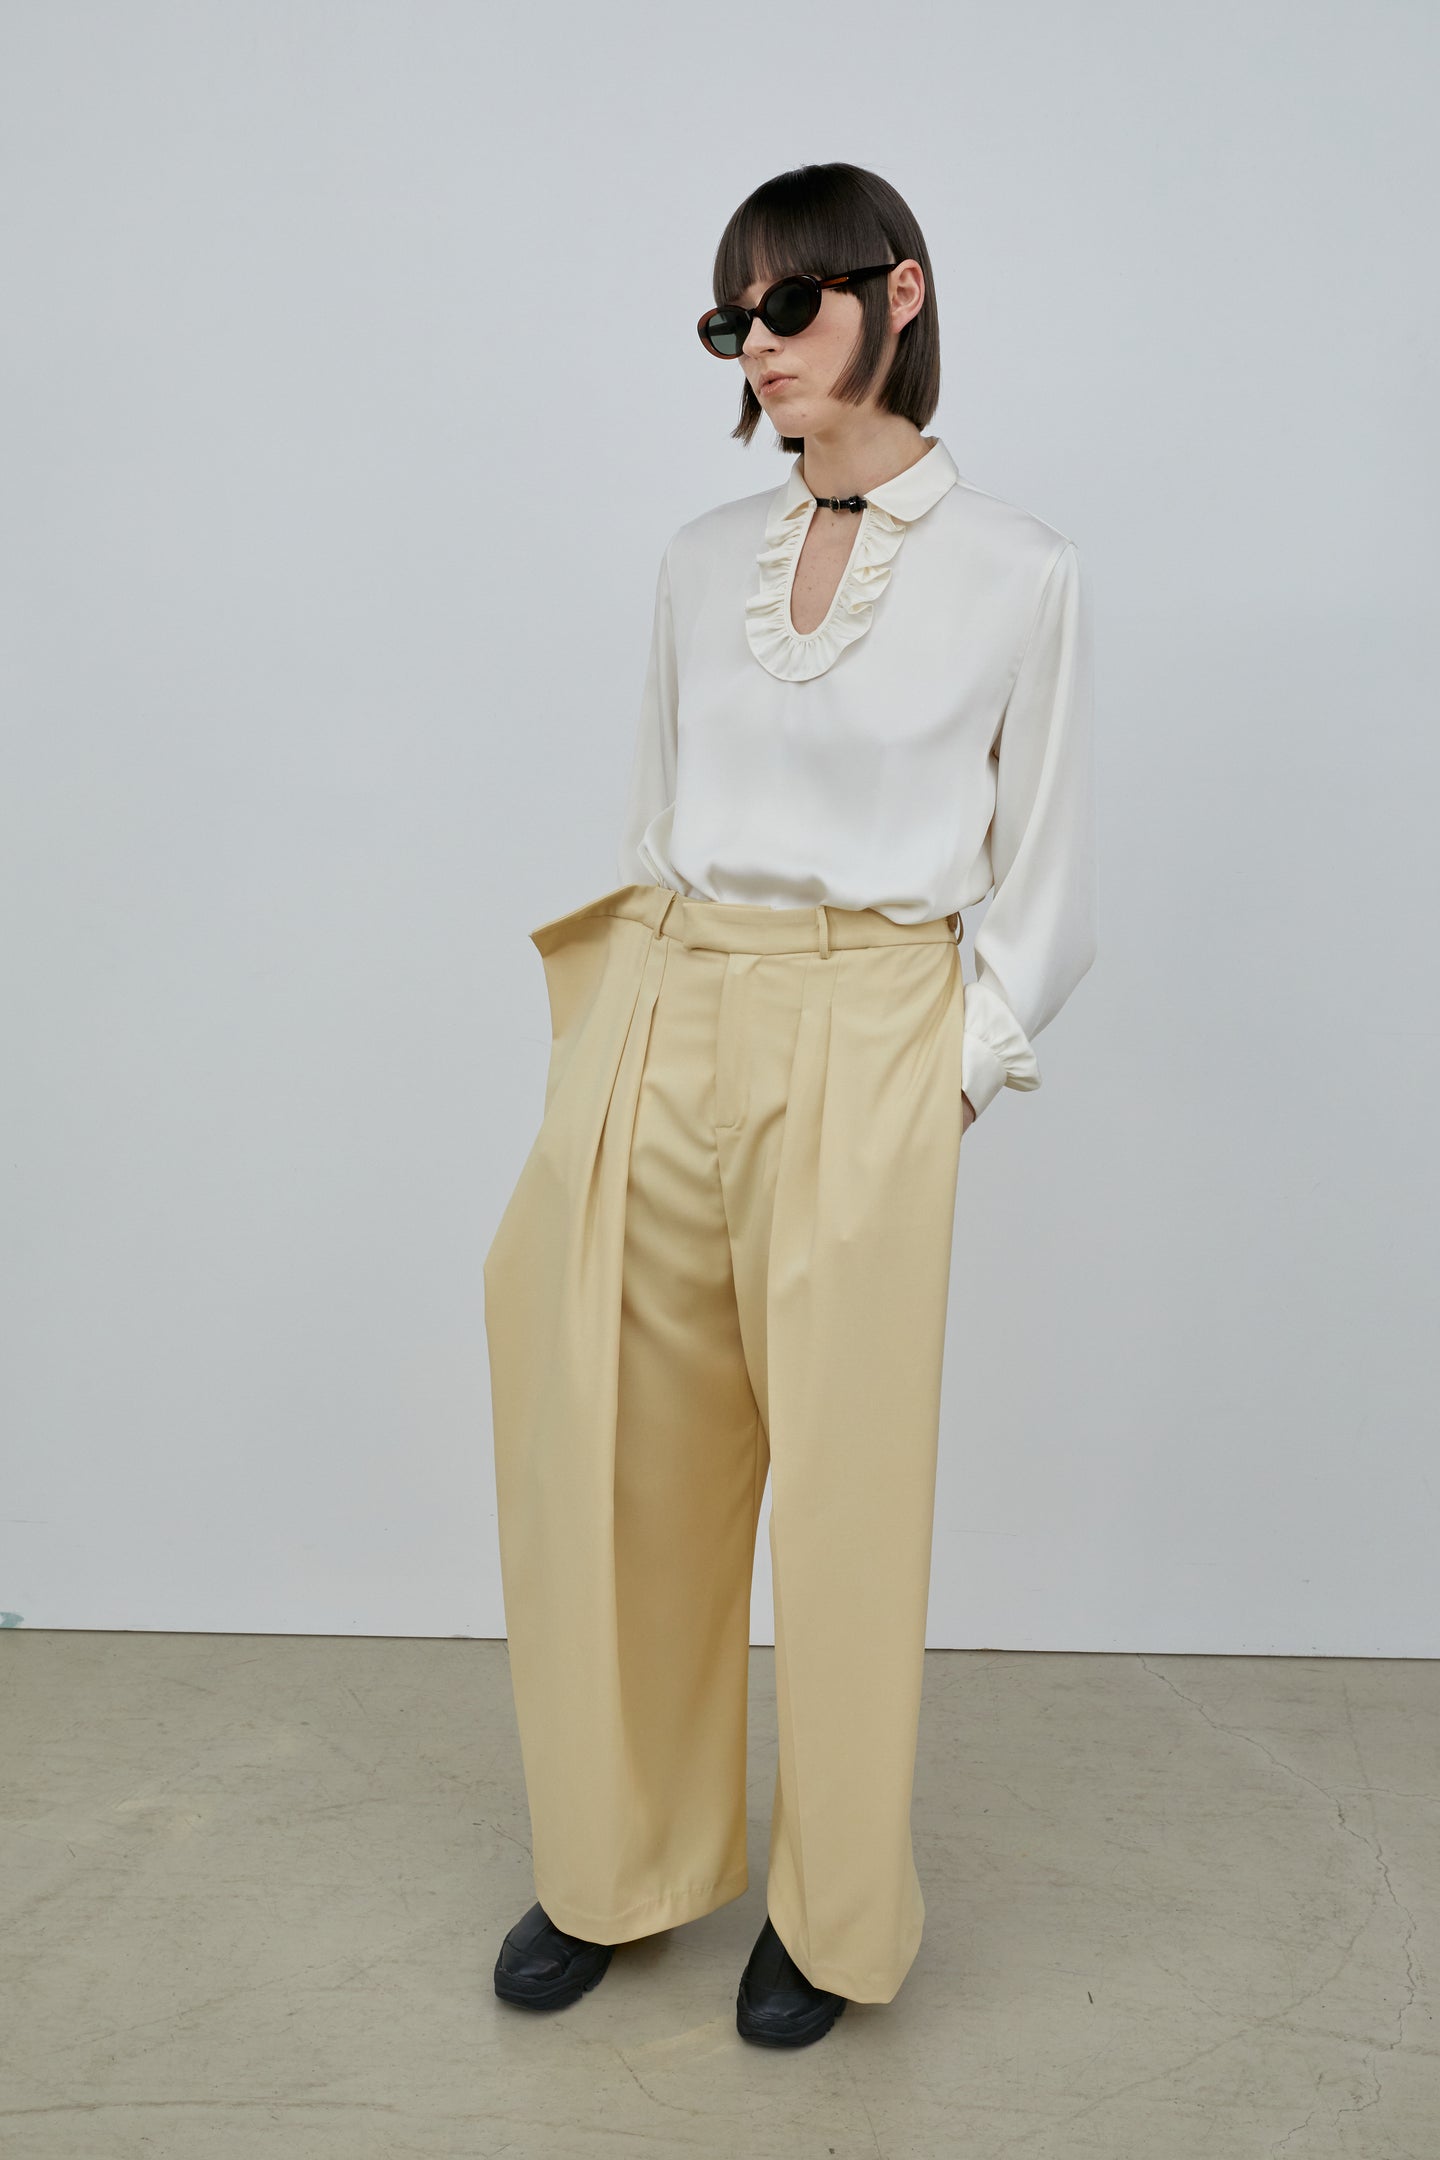 Ruffled Blouse With Belt, Cream – SourceUnknown